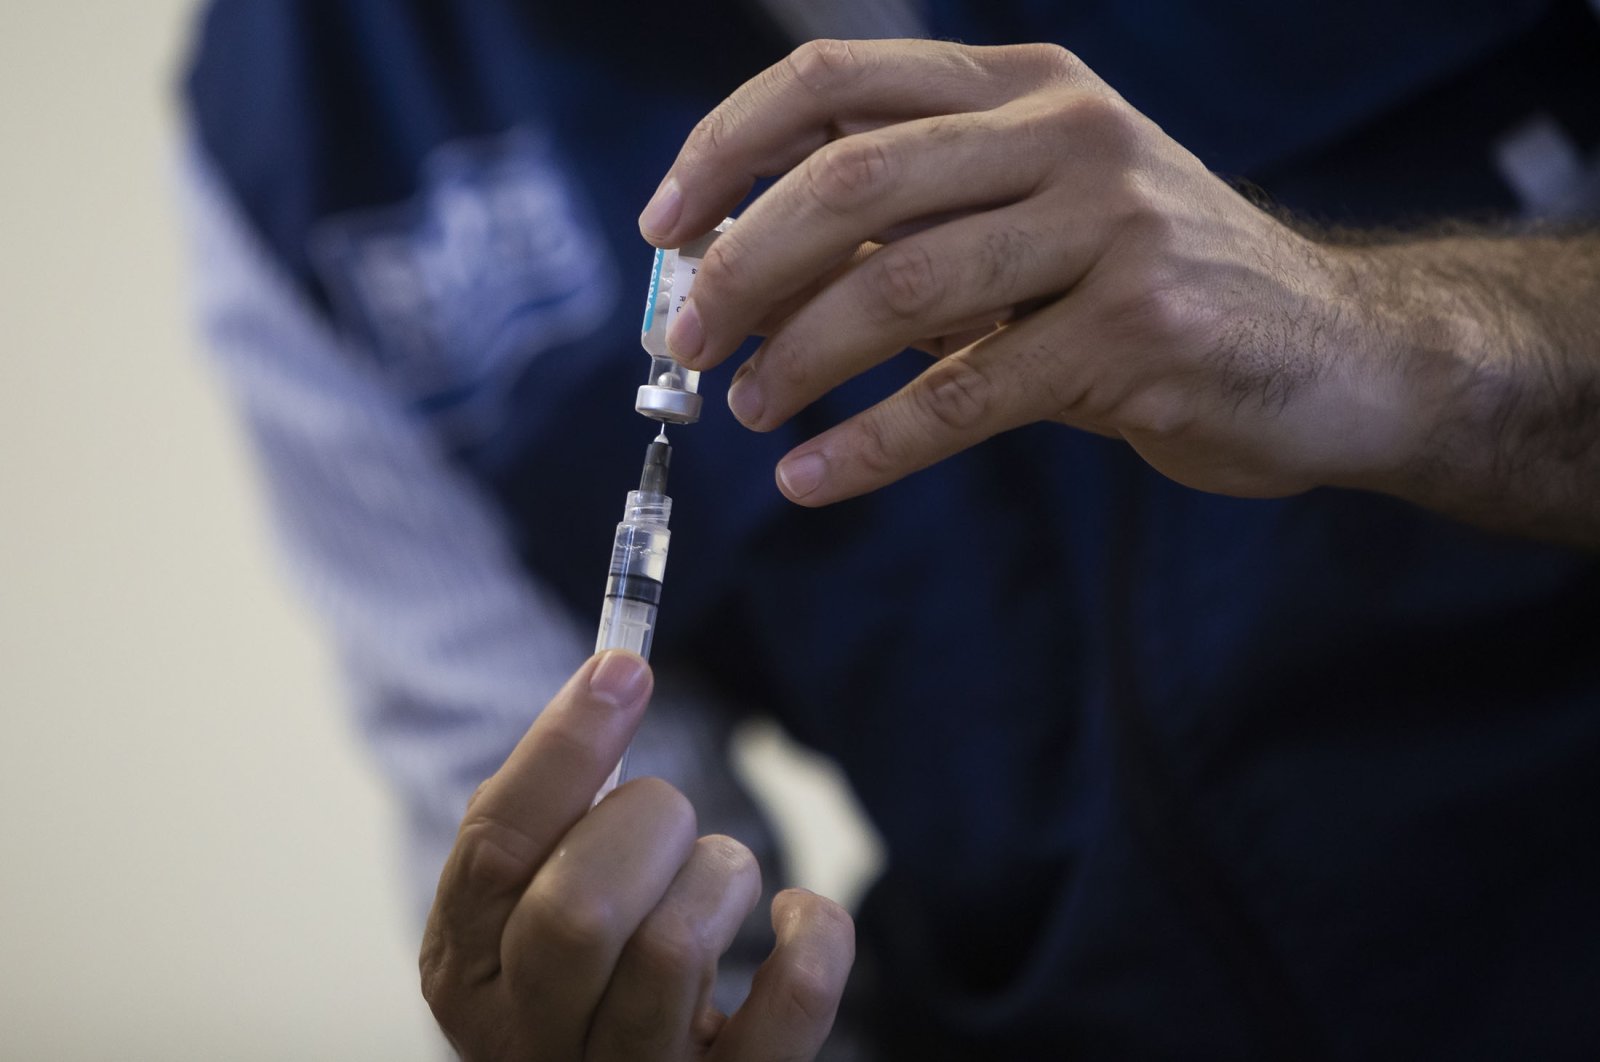 A health worker prepares a dose of the Oxford-AstraZeneca vaccine for COVID-19, as part of a priority vaccination program for people with disabilities at a vaccination center in Rio de Janeiro, Brazil, April 25, 2021. (AP Photo)